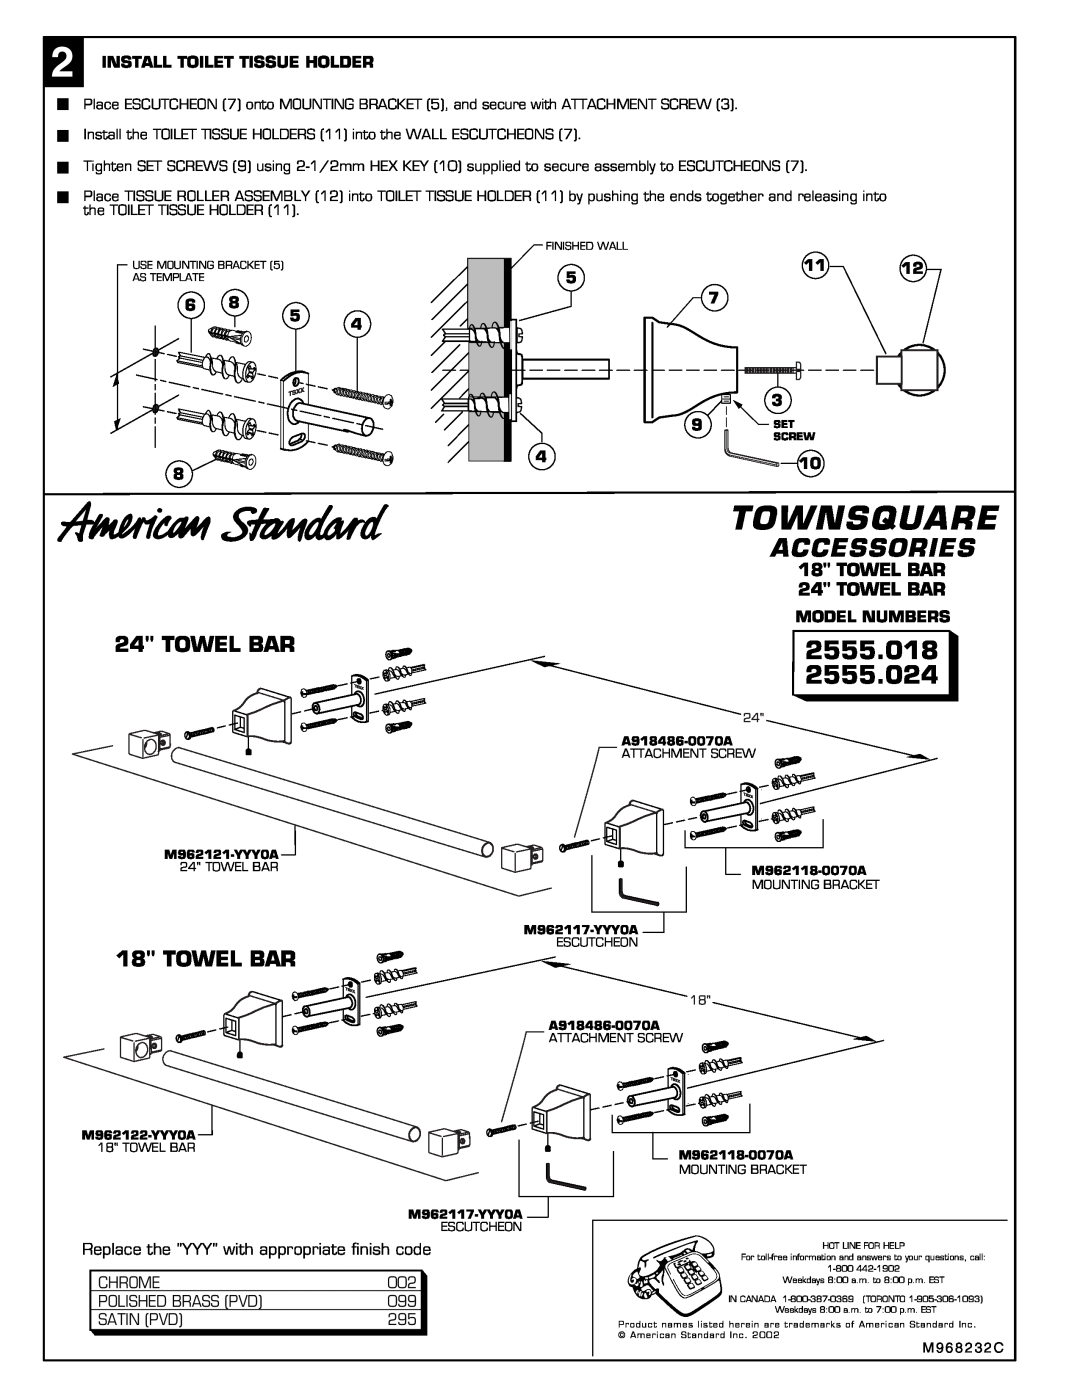 American Standard 2555.061, 2555.034 2555.018, 2555.024, Towel Bar, Townsquare, Accessories, Model Numbers 